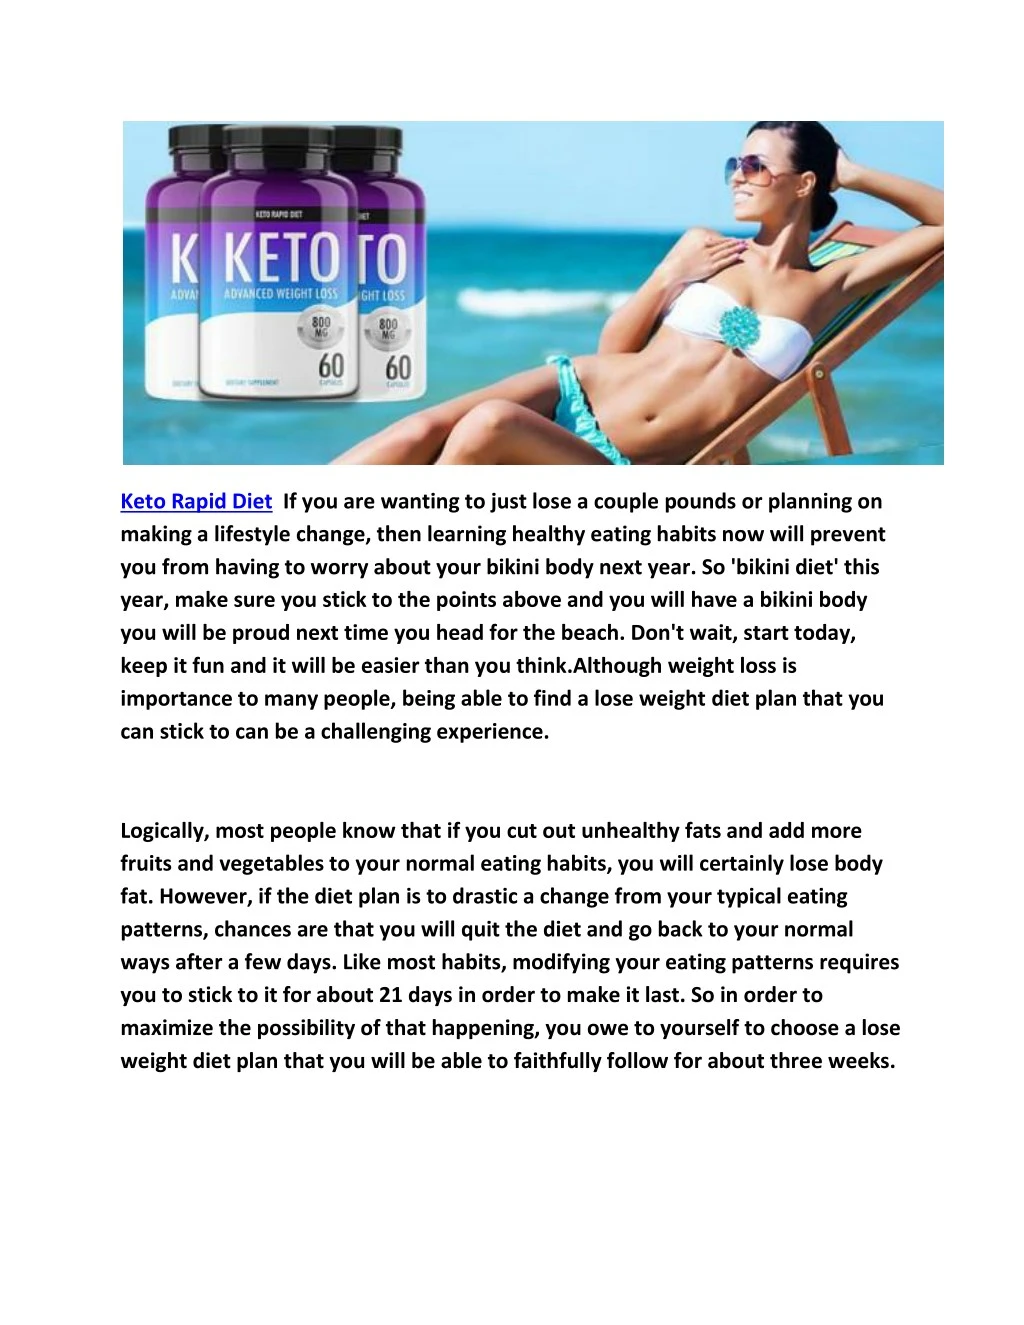 keto rapid diet if you are wanting to just lose